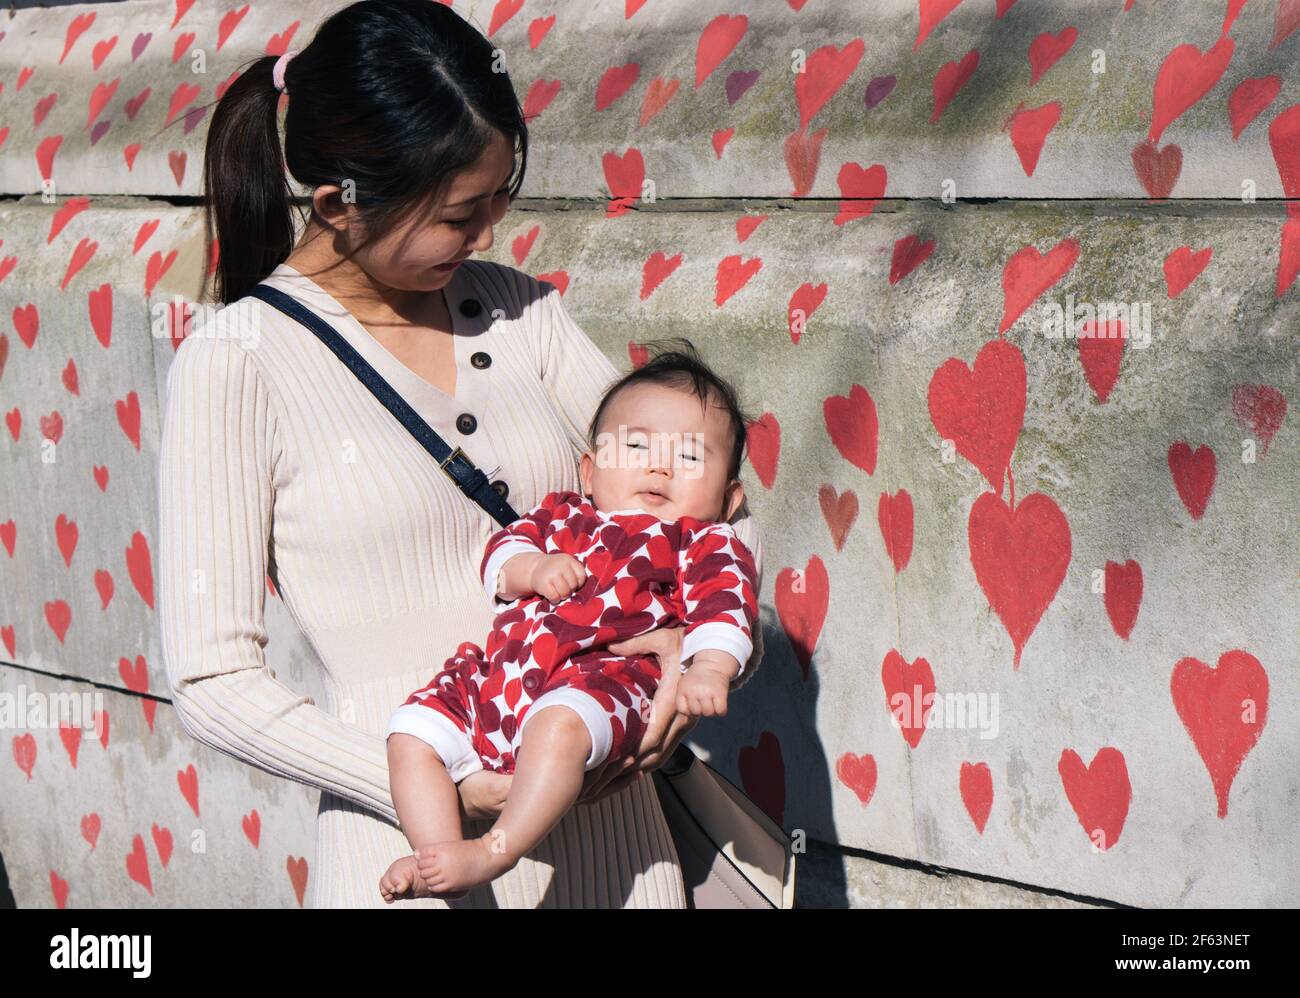 St Thomas's Hospital, London, UK. 29th March 2021. The bereaved and volunteers paint hearts for each person who has died of Covid. A woman holds a baby dressed in a heart patterned baby grow in front of the wall. Credit: Denise Laura Baker/Alamy Live News Stock Photo